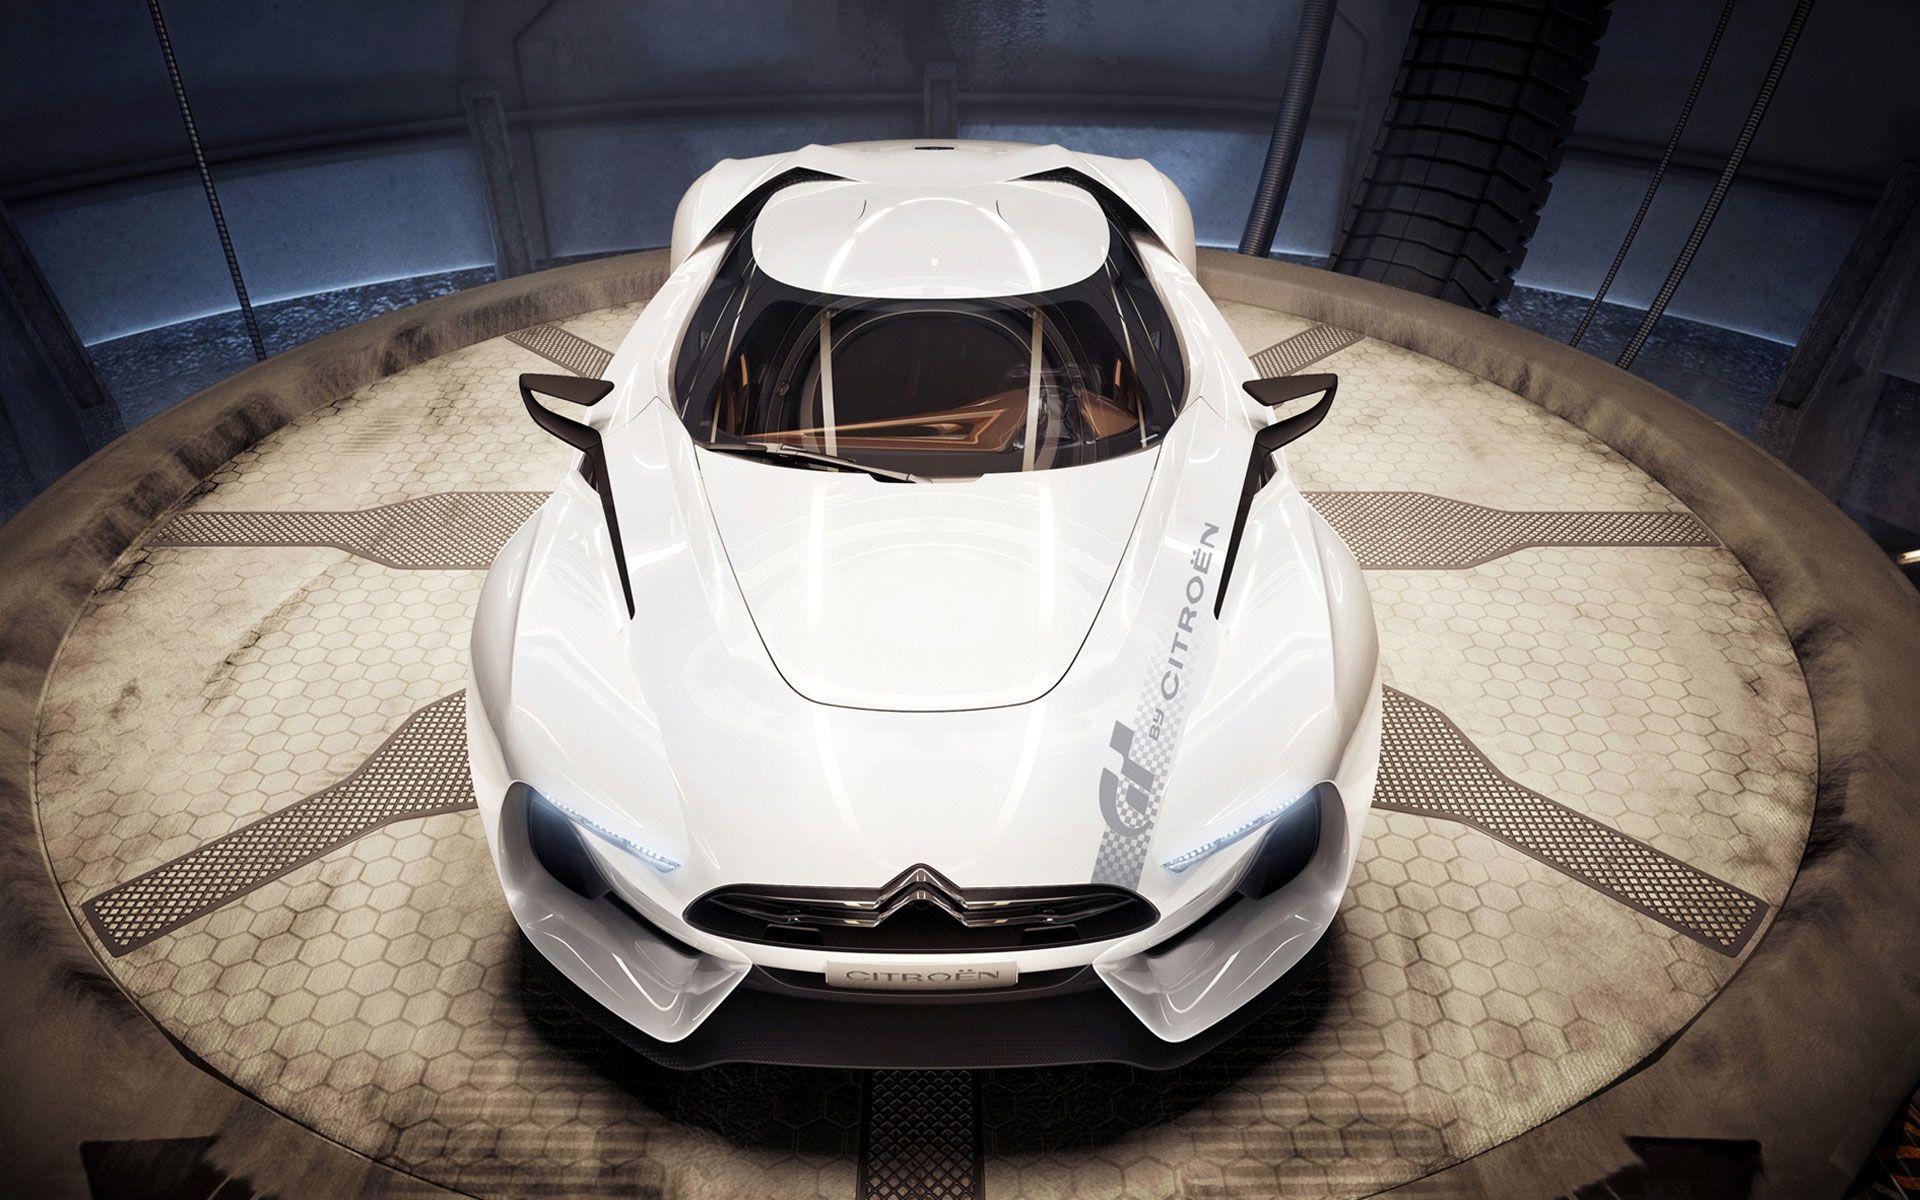 Citroen 4K wallpaper for your desktop or mobile screen free and easy to download